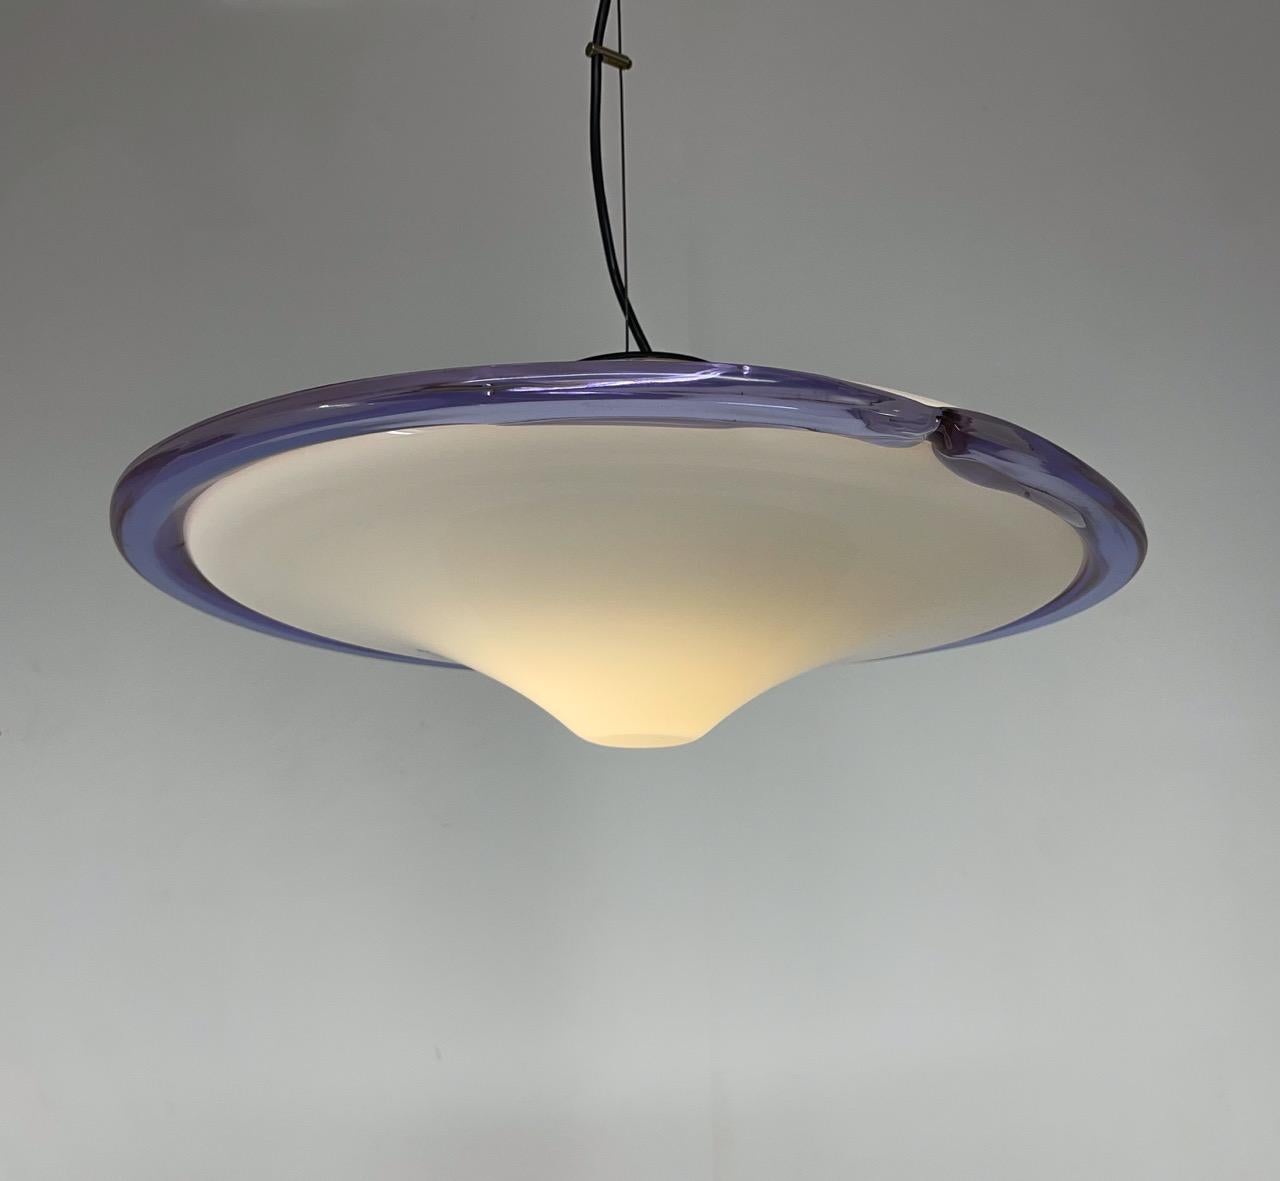 Murano glass, Italian pendant from 1970's. Beautiful combination of white opaline glass with violet rim.